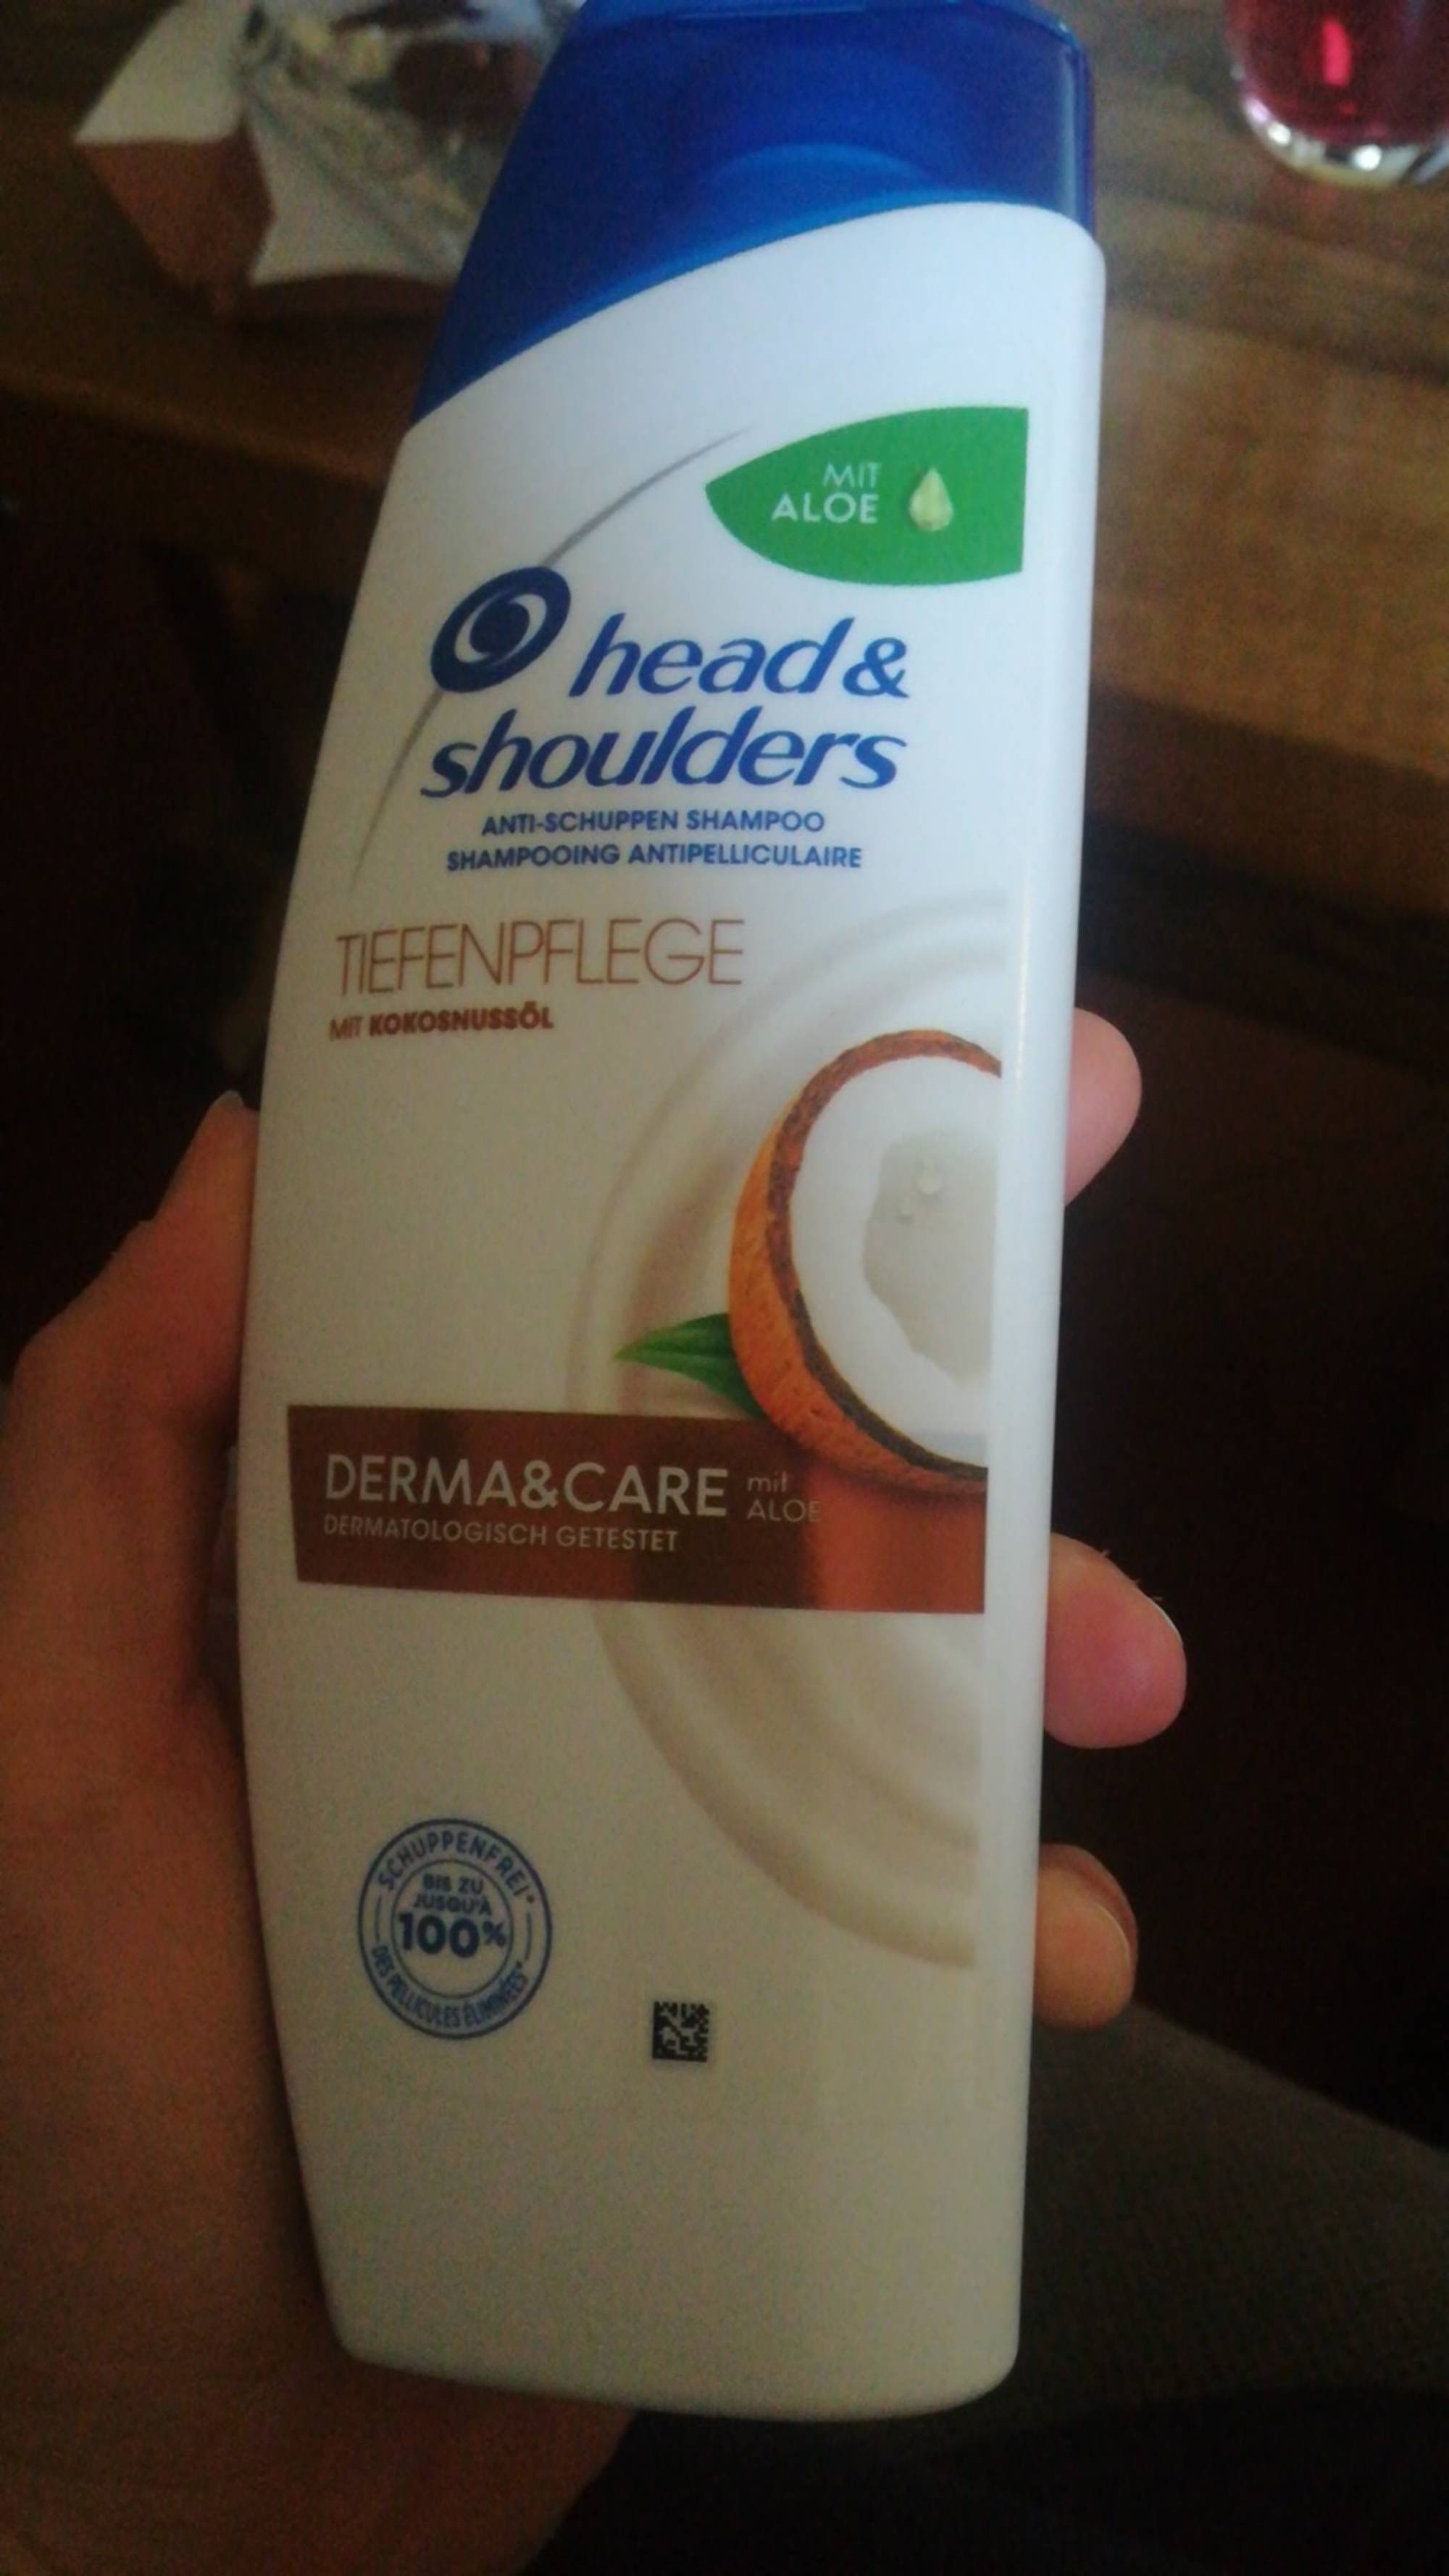 HEAD & SHOULDERS - Derma & care - Shampooing antipelliculaire